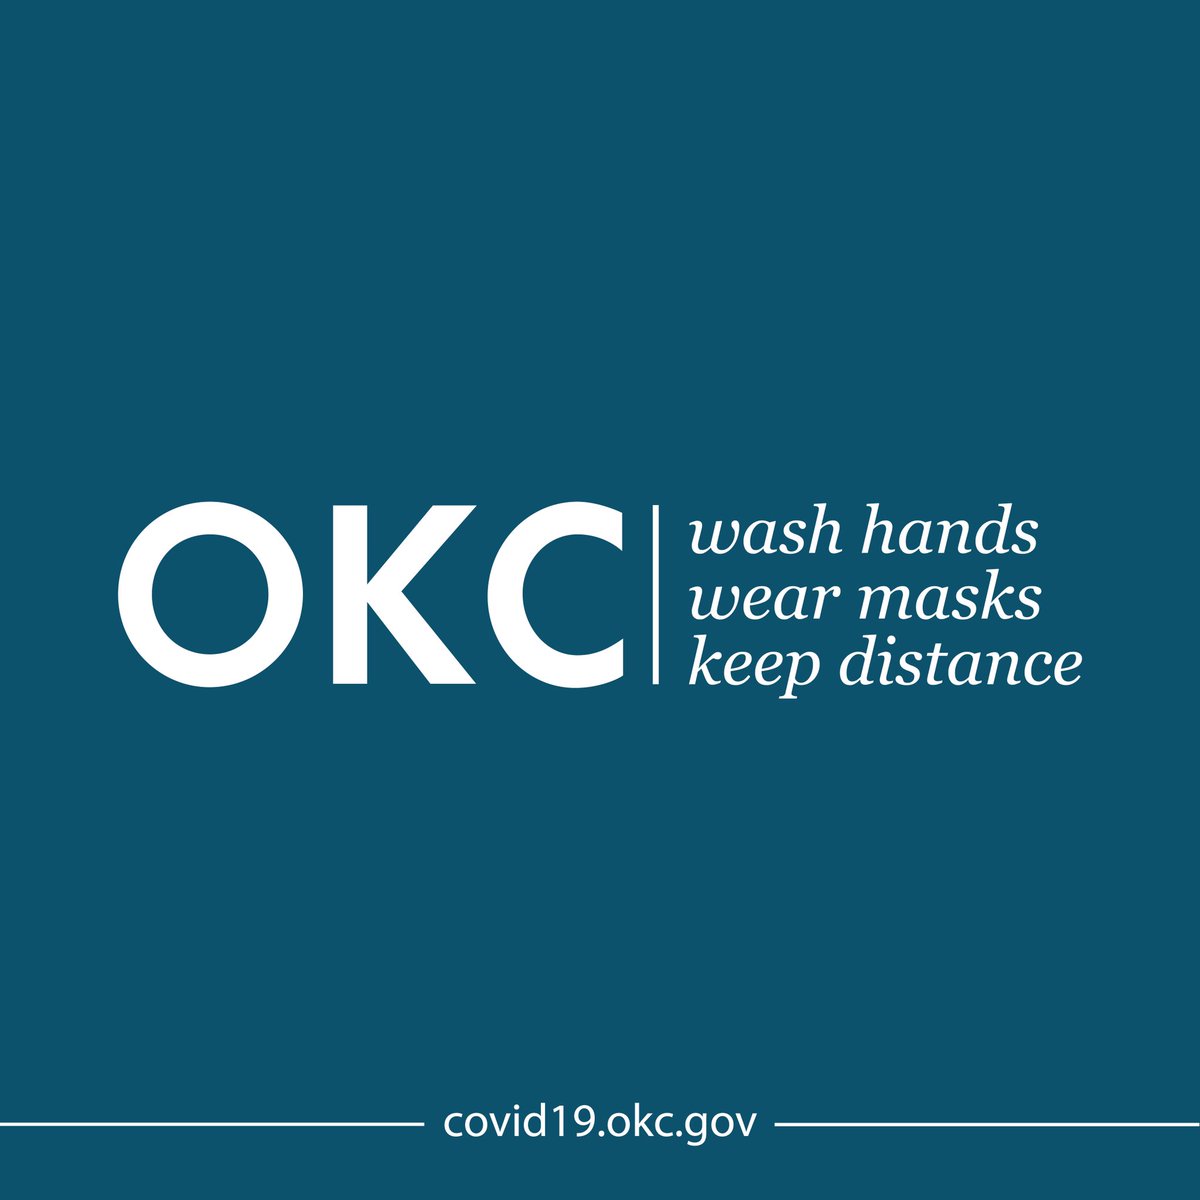 In the meantime, restrictions issued two weeks ago on bars, restaurants and theater-style seating remain in effect. As always, wear your mask, wash your hands and keep your distance. Be well, OKC.